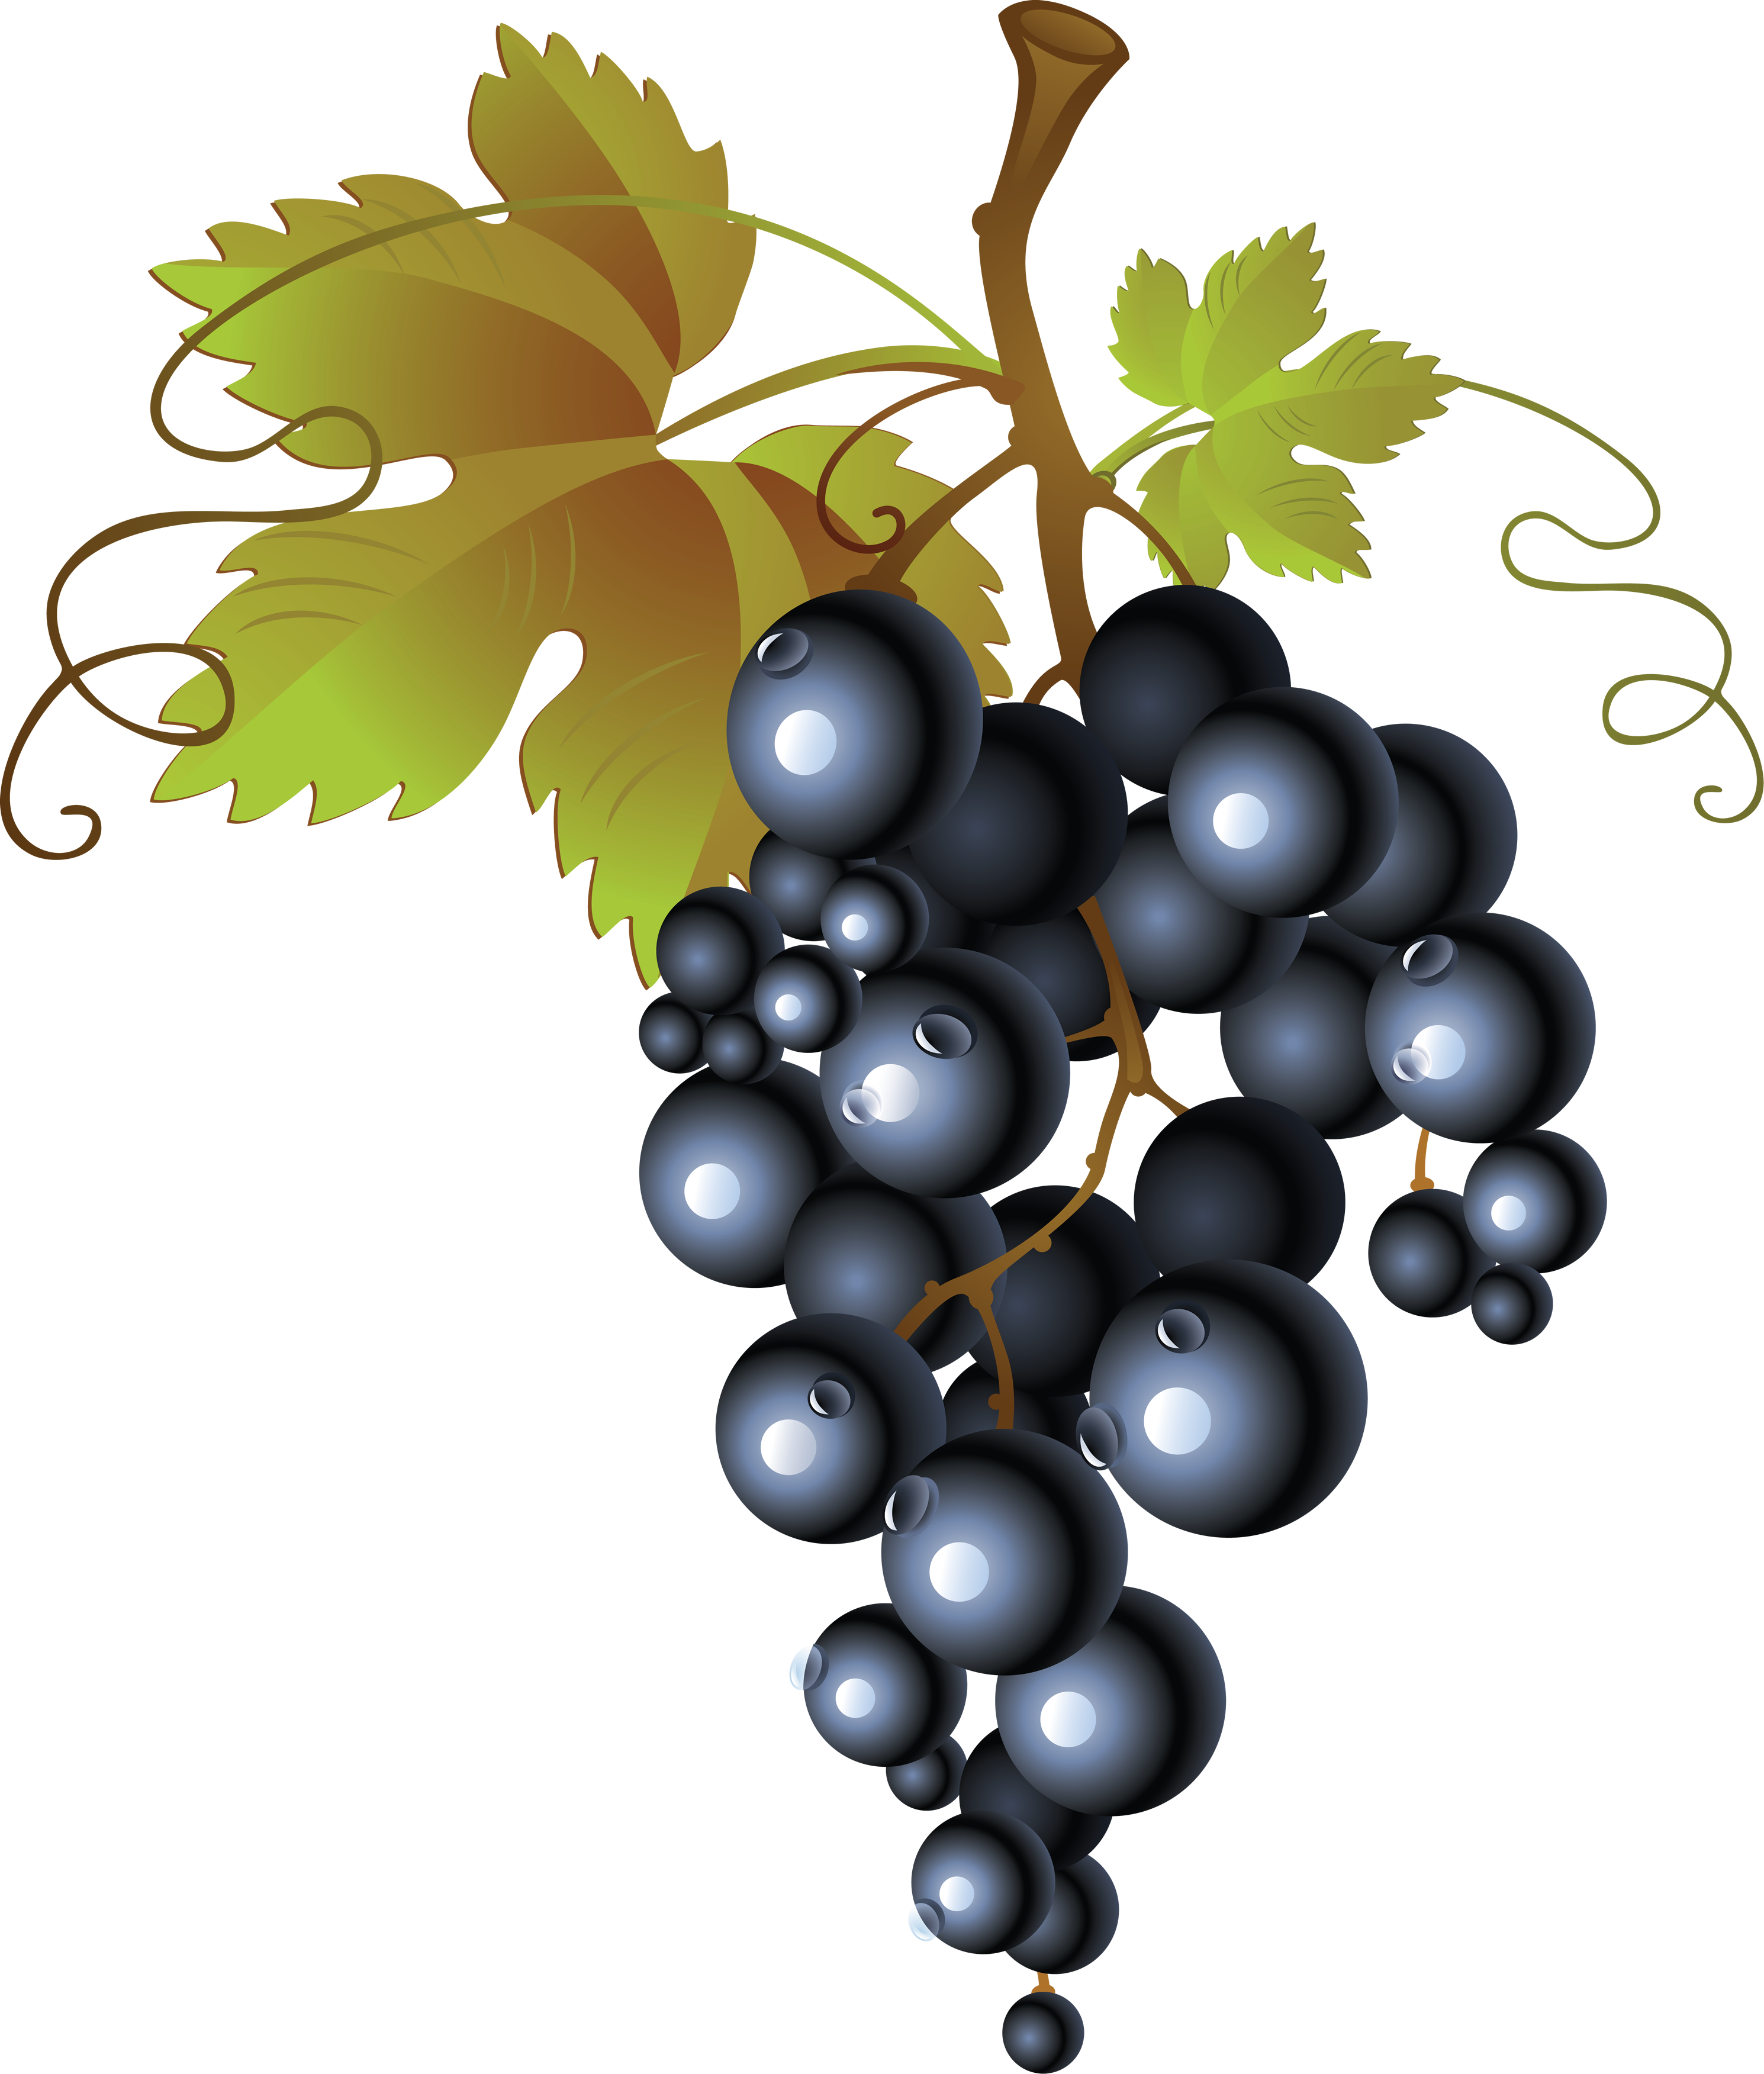 Seedless Grape Facts How Does A Seedless Grape Reproduce, Grape Vine PNG HD Free - Free PNG